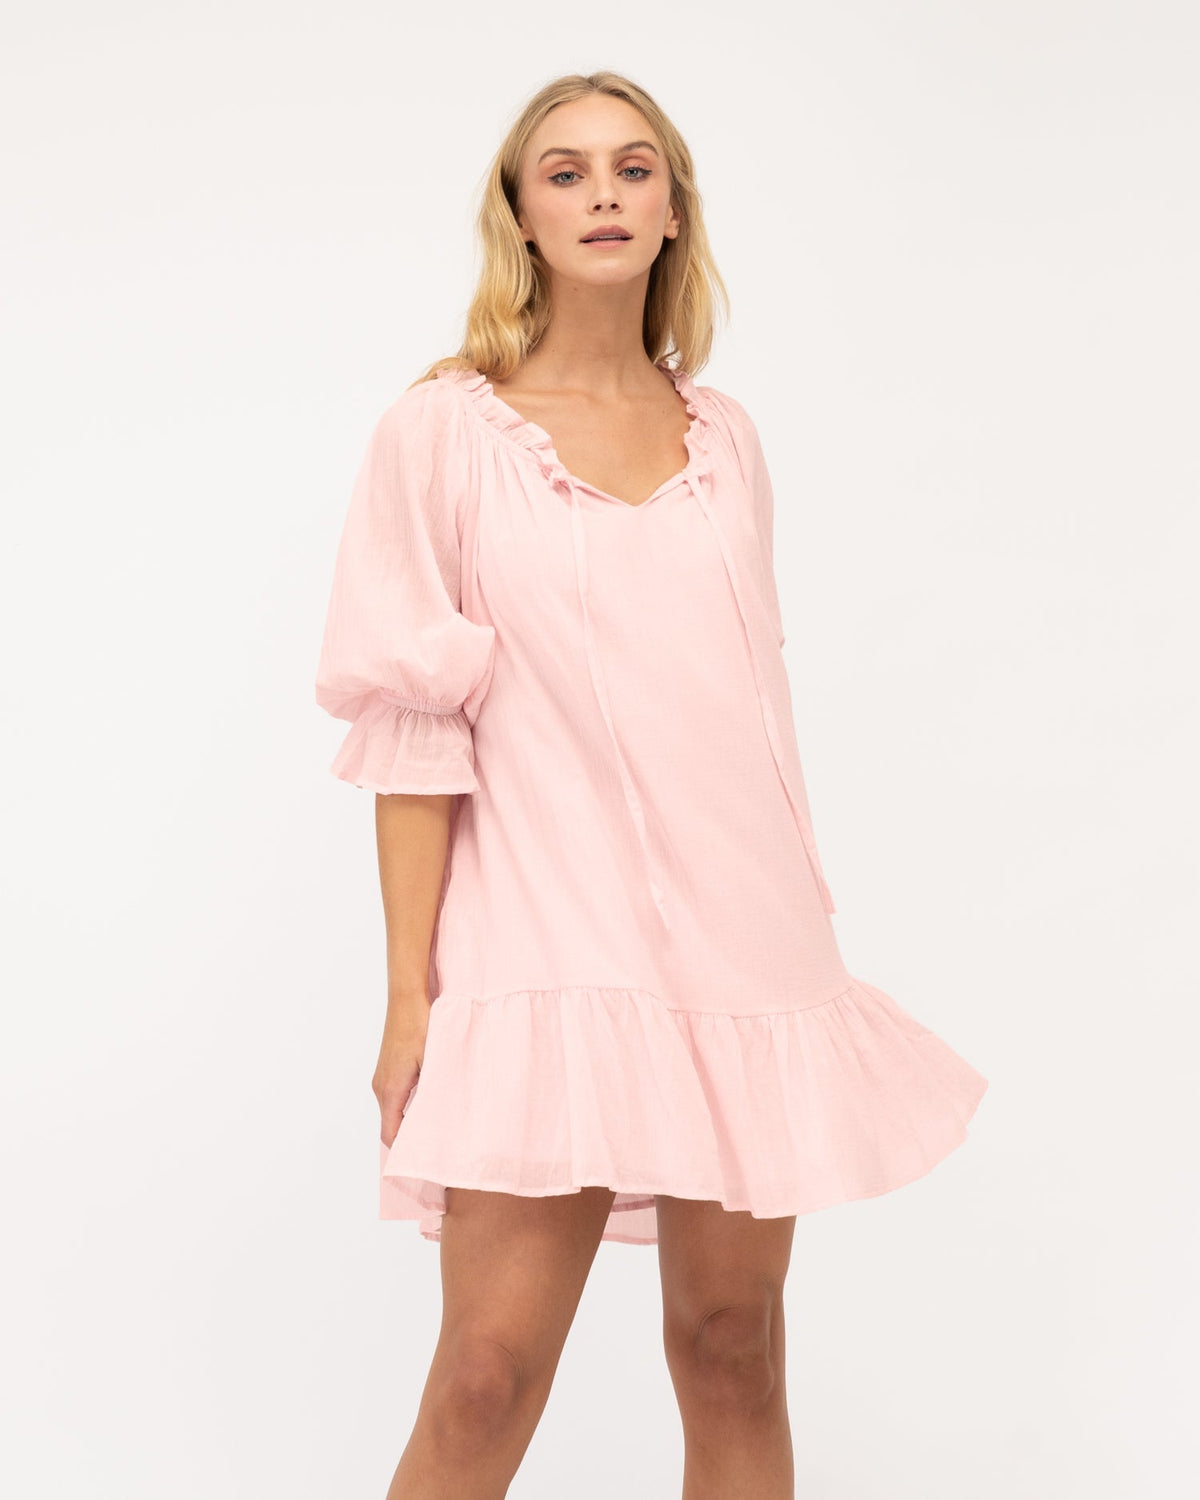 A model wearing a pink ruffle tiered dress and sandals. The dress is fully lined and has a skirt with frill. Pink dress is from the Ebby and I collection designed by Global Fashion House. 